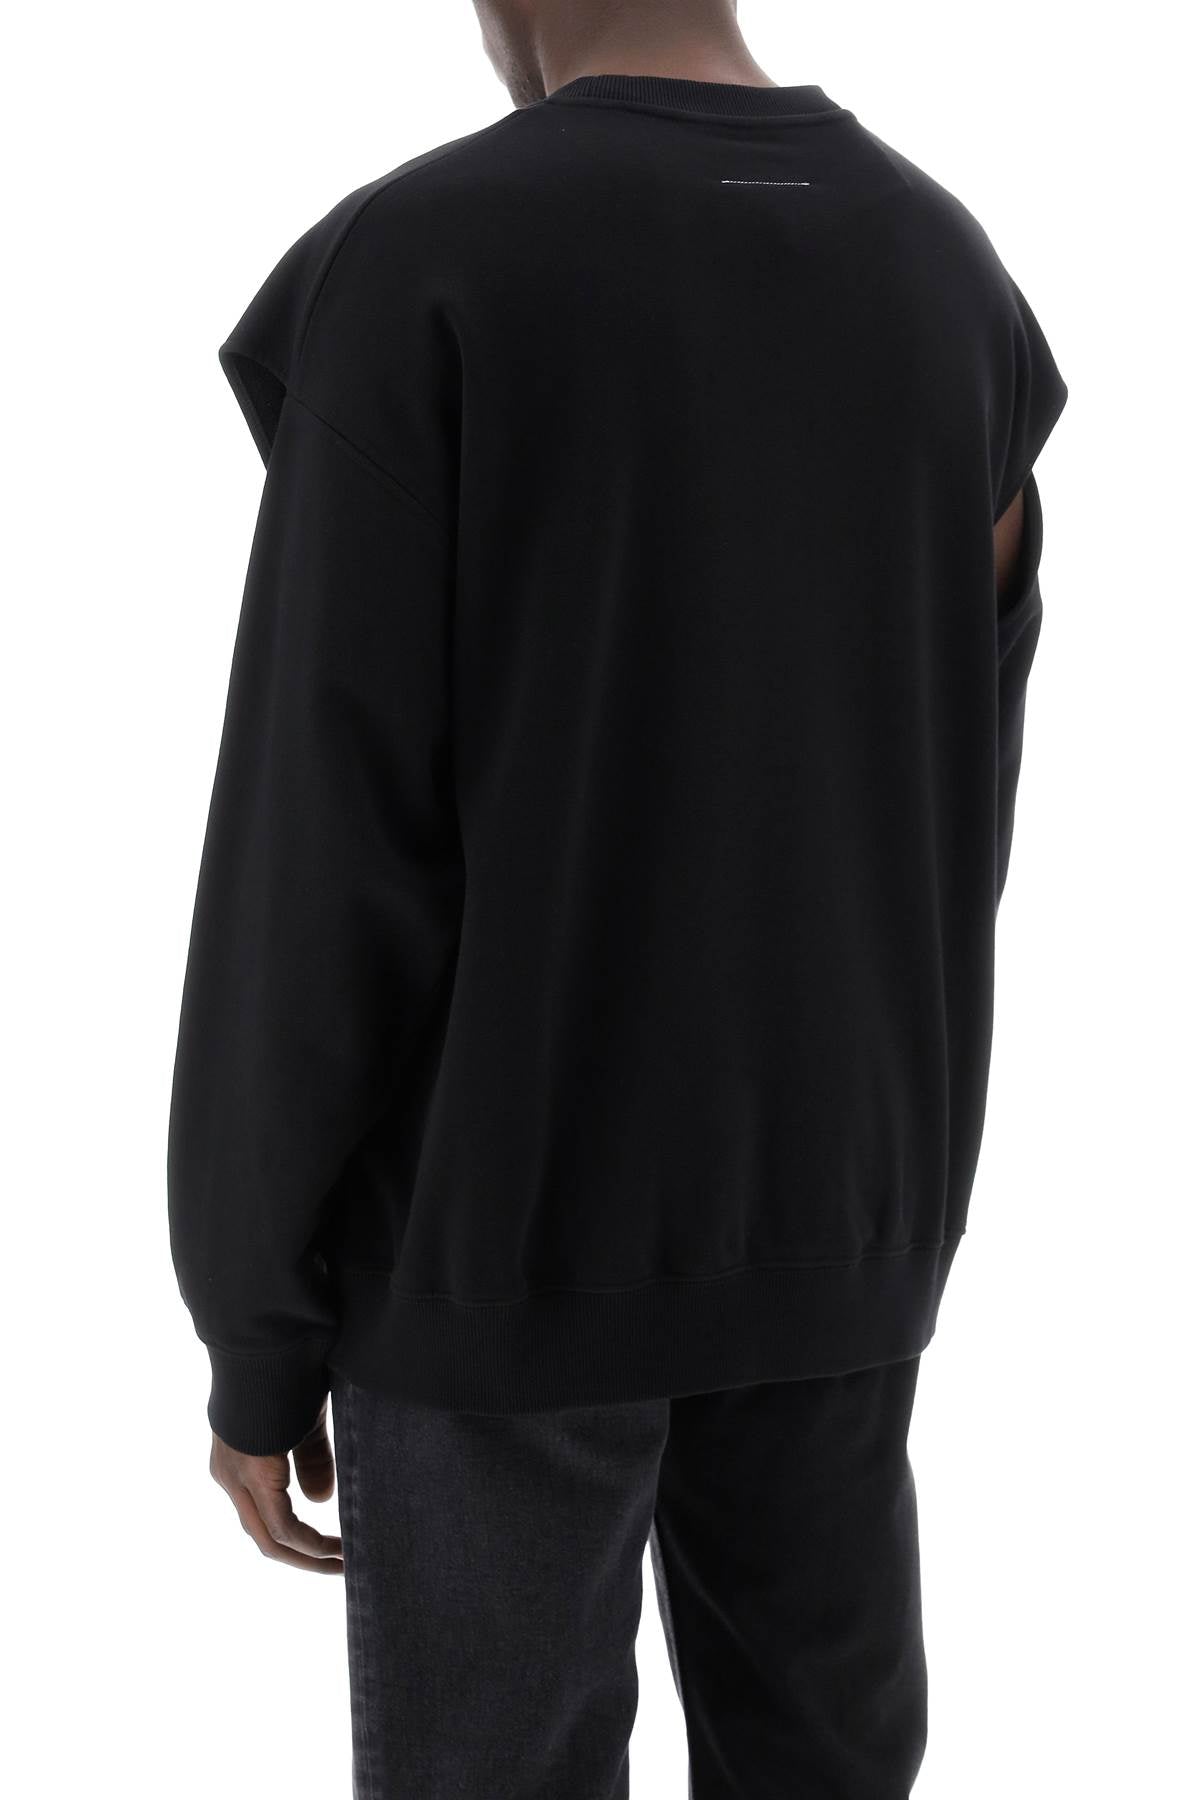 Mm6 maison margiela "sweatshirt with cut out and numeric-2